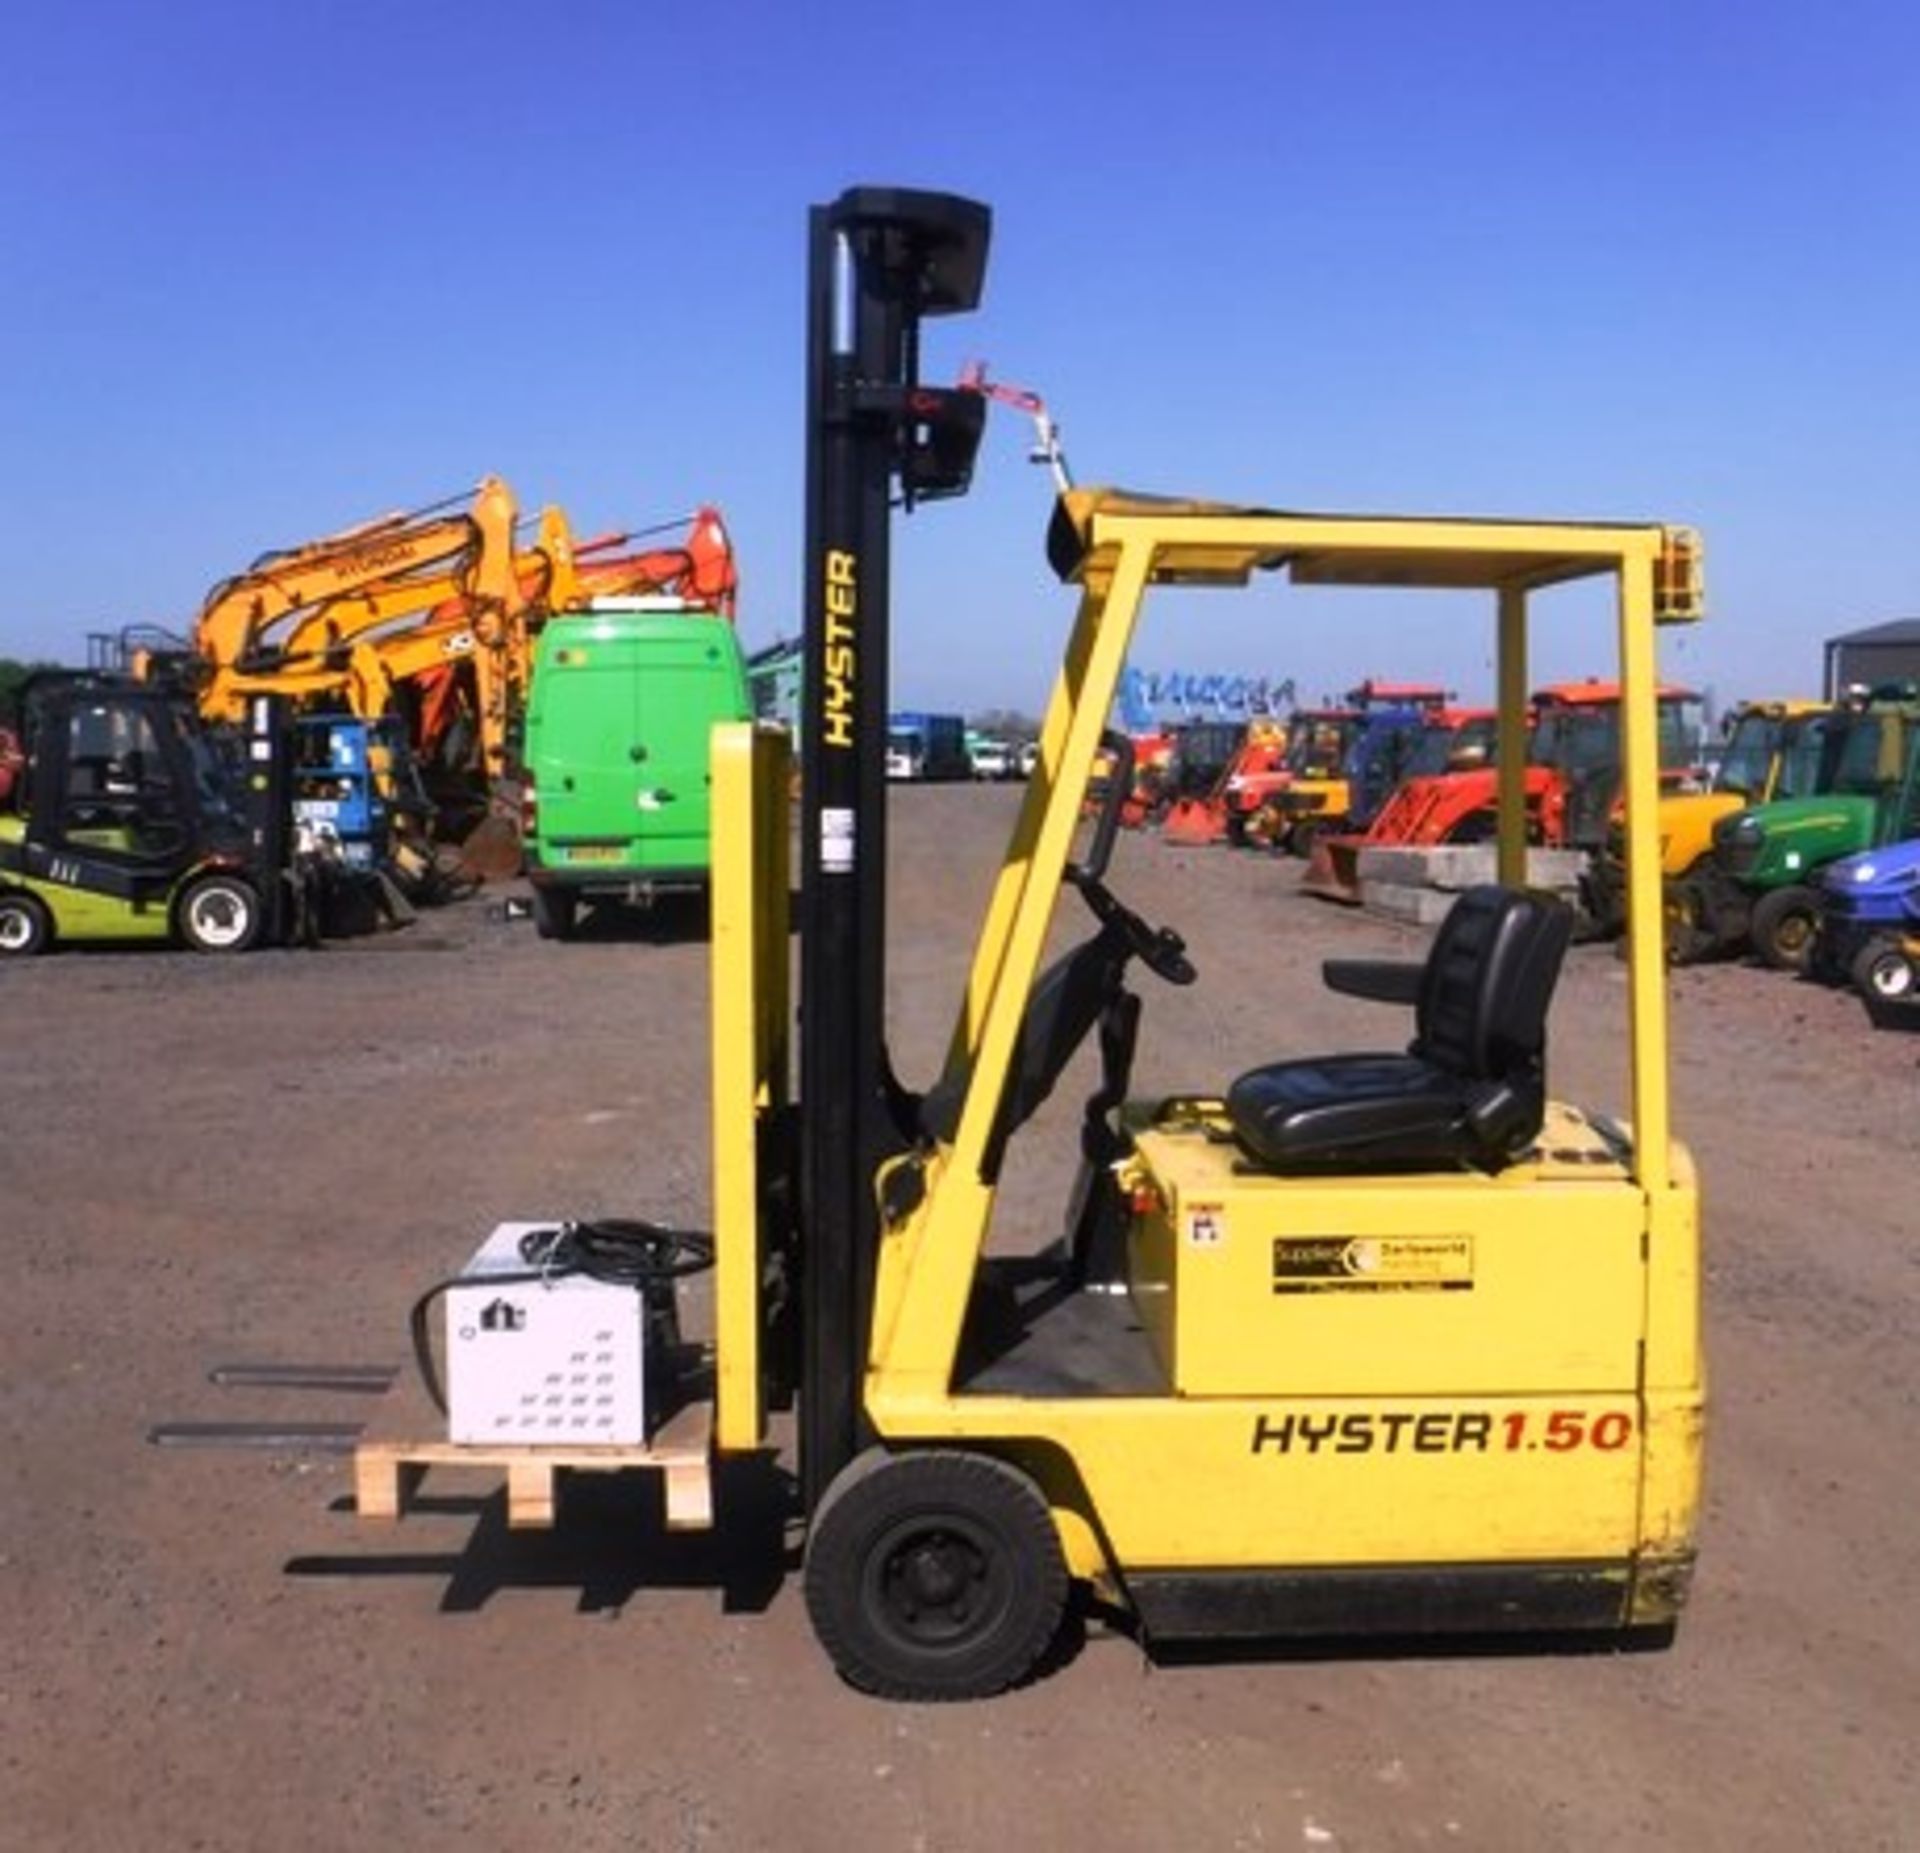 2011 HYSTER forklift A 1.50XL, s/n - C203B01762J, Max Reach - 3800mm, 402hrs (not verified) - Image 6 of 13